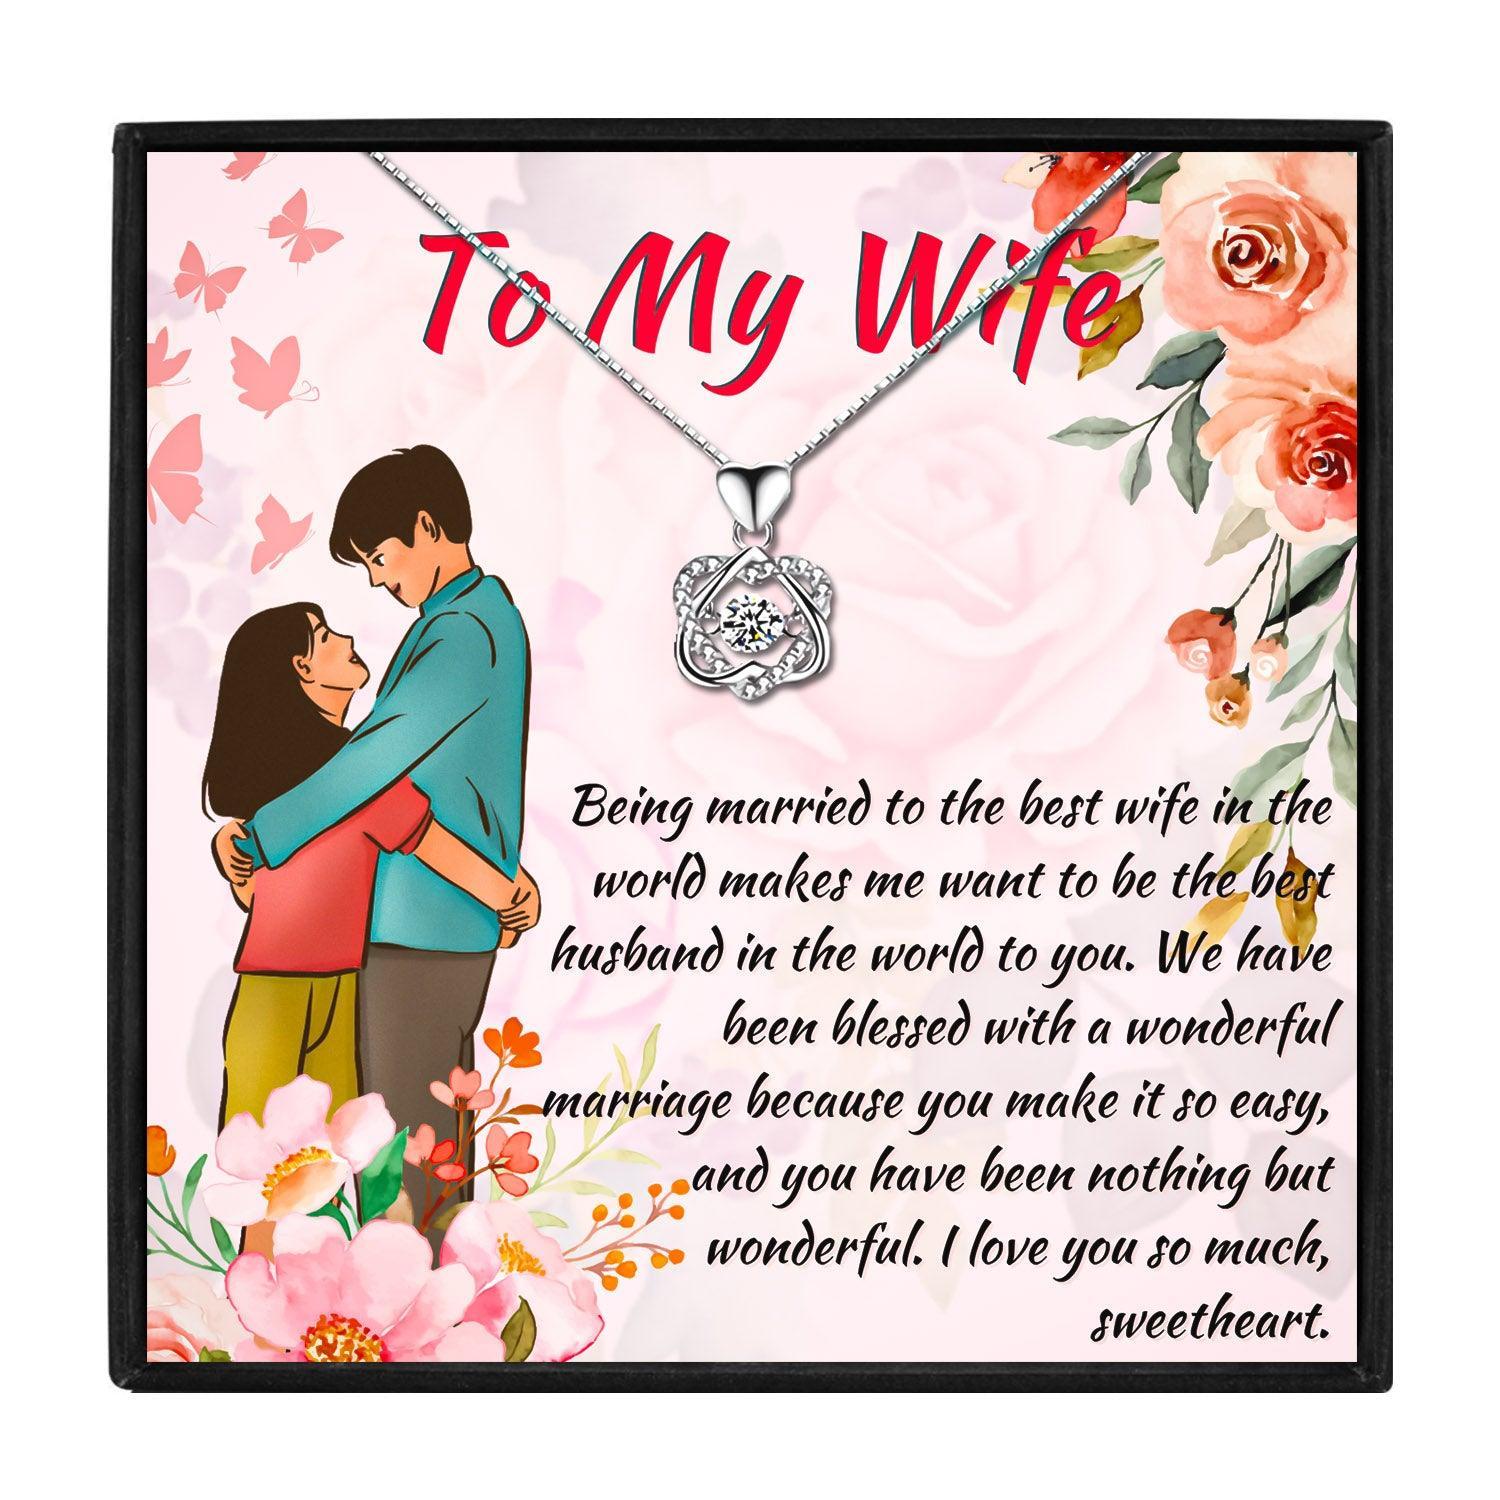 To My Beautiful Soulmate Luxury Gift Necklace Set for Christmas 2023 | To My Beautiful Soulmate Luxury Gift Necklace Set - undefined | Romantic Anniversary Gift For Wife, To My Wife Gifts Necklace, To My Wonderful Wife necklace, wife gift, wife gift ideas | From Hunny Life | hunnylife.com